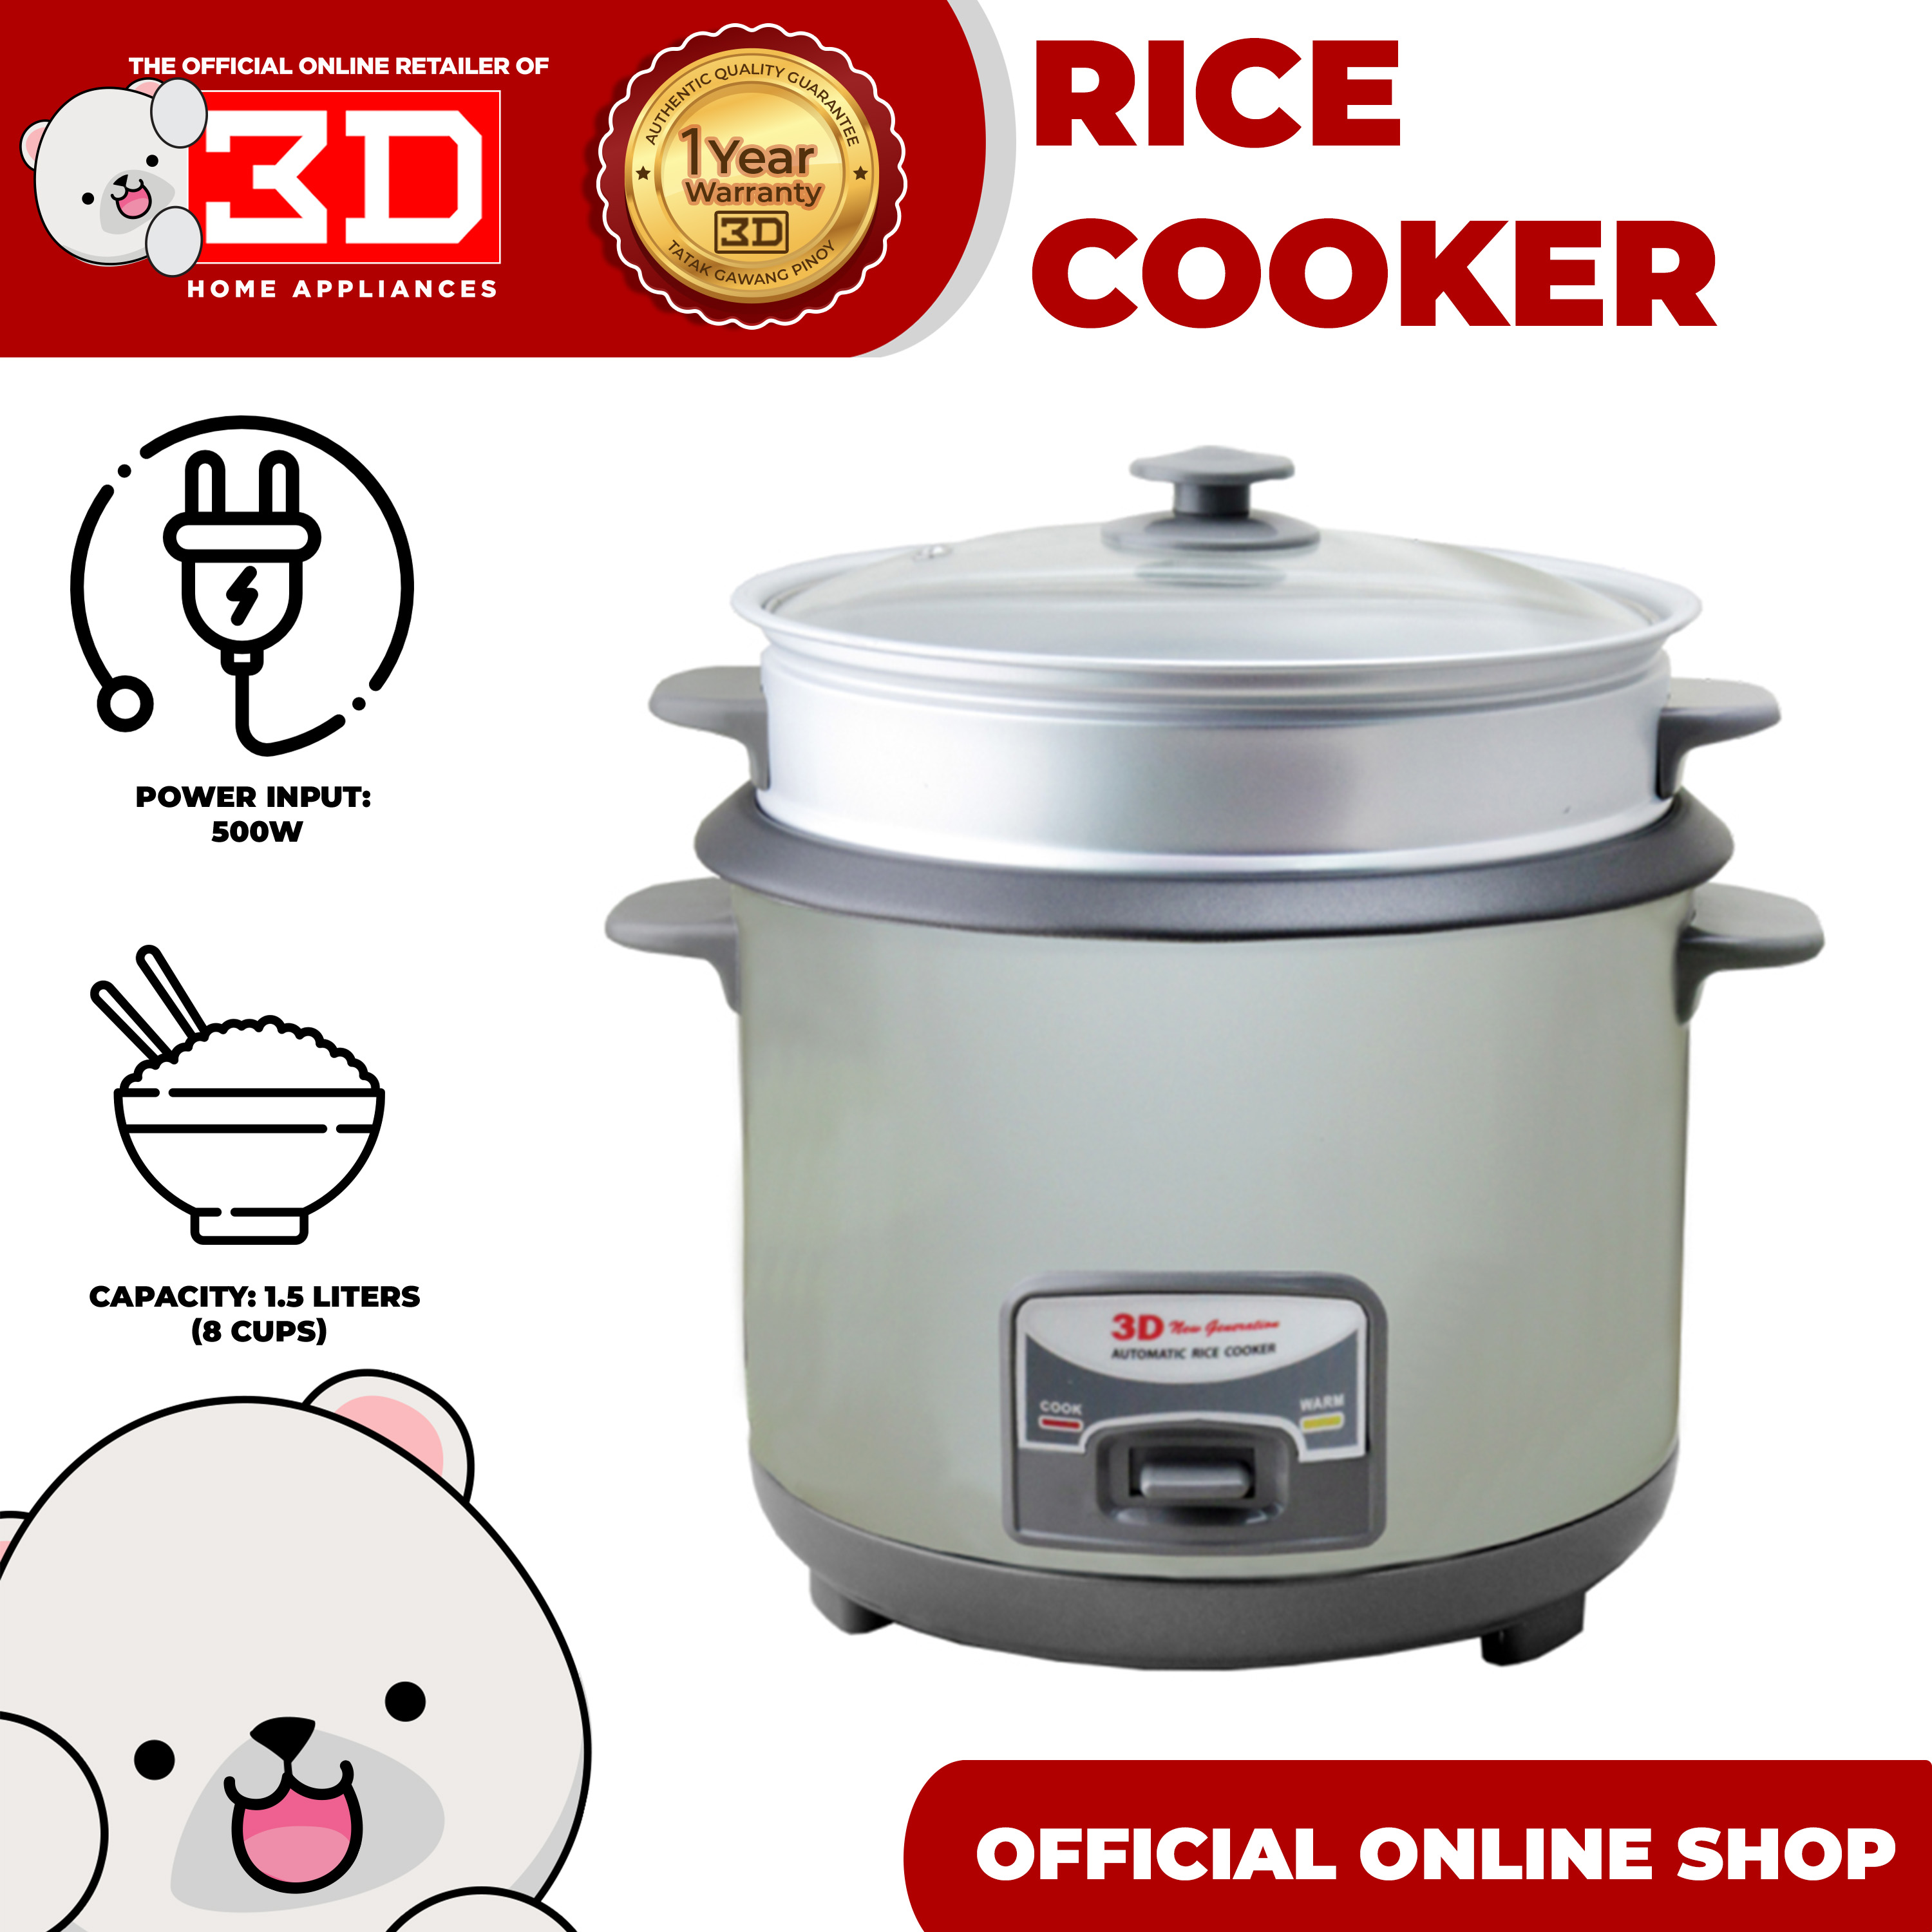 Buy 3D Rice Cookers for sale online